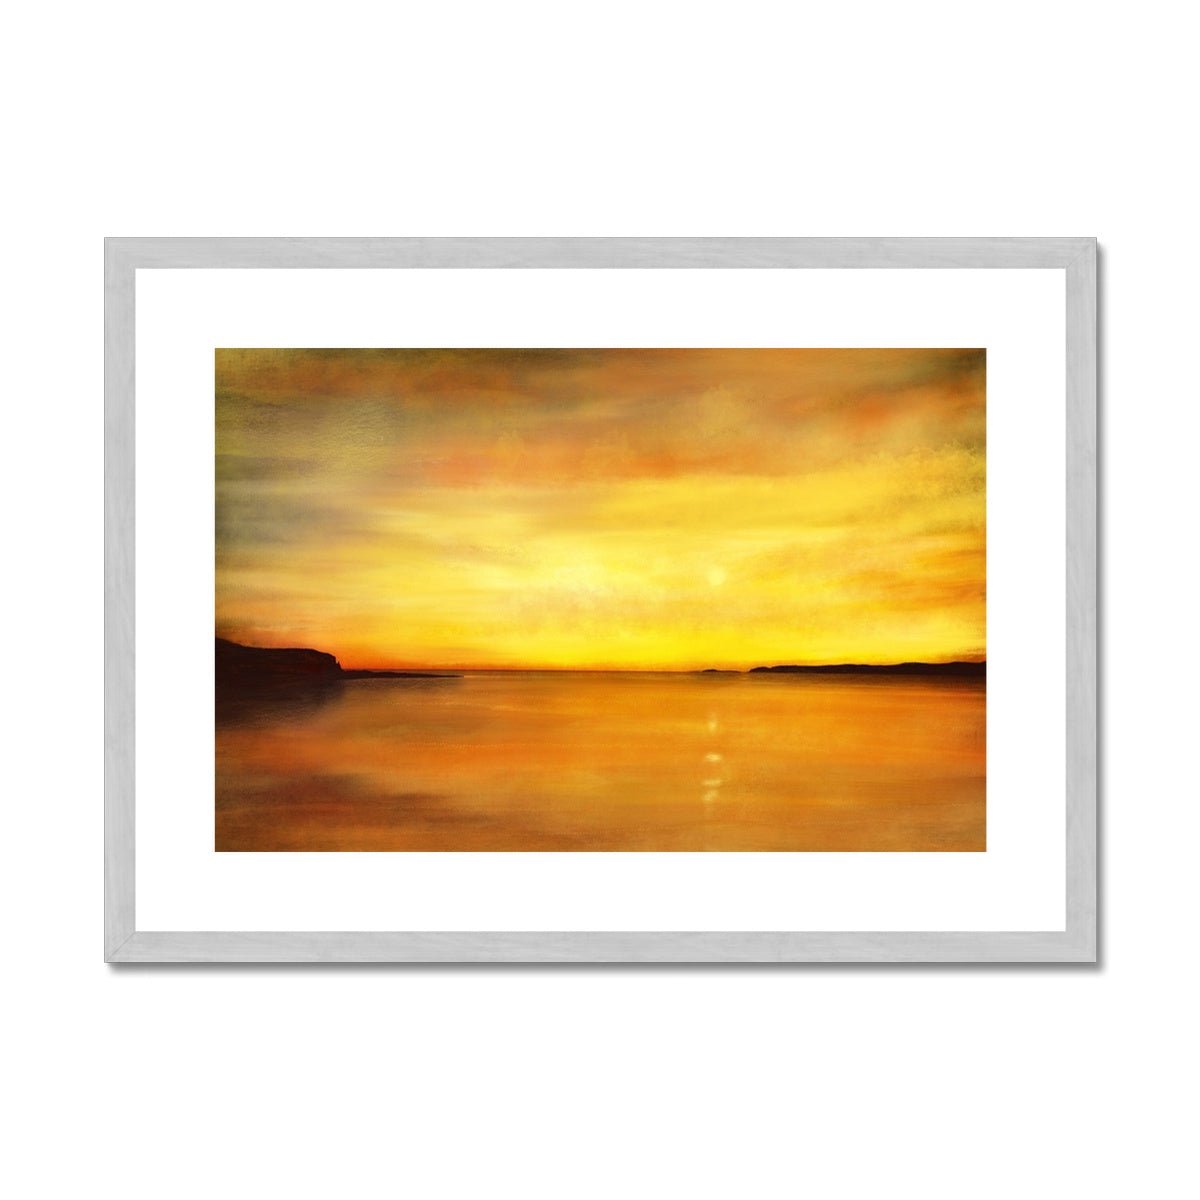 King's Cave Sunset Arran Painting | Antique Framed & Mounted Prints From Scotland-Antique Framed & Mounted Prints-Arran Art Gallery-A2 Landscape-Silver Frame-Paintings, Prints, Homeware, Art Gifts From Scotland By Scottish Artist Kevin Hunter